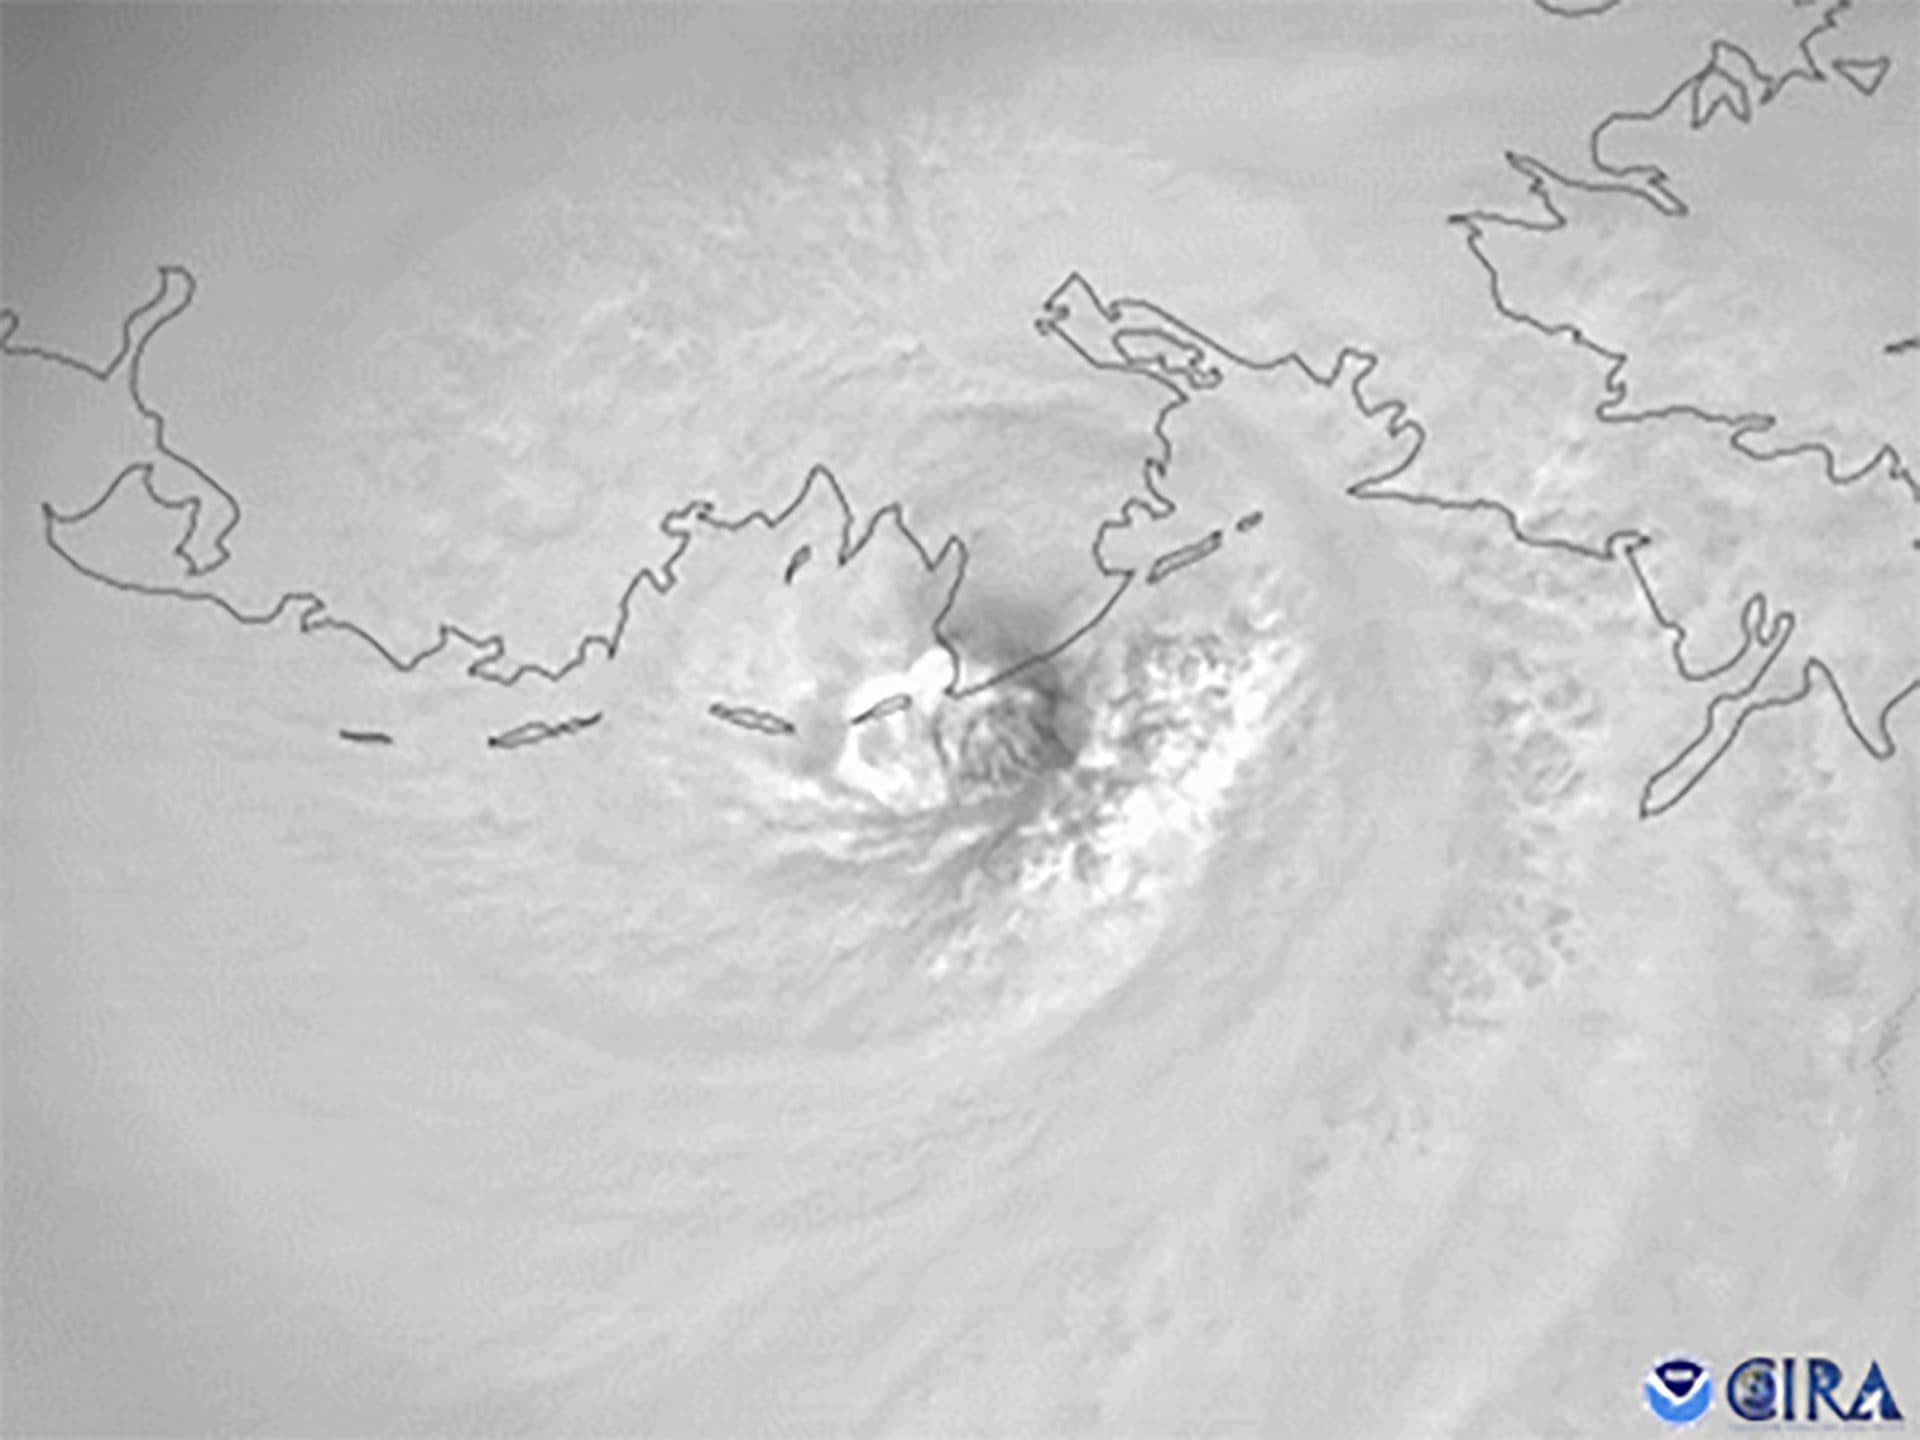 This satellite image provided by the National Oceanic and Atmospheric Administration and captured by NOAA's GOES-16 shows Hurricane Ida making landfall near Port Fourchon, La., Sunday, Aug. 29, 2021. (NOAA via AP)